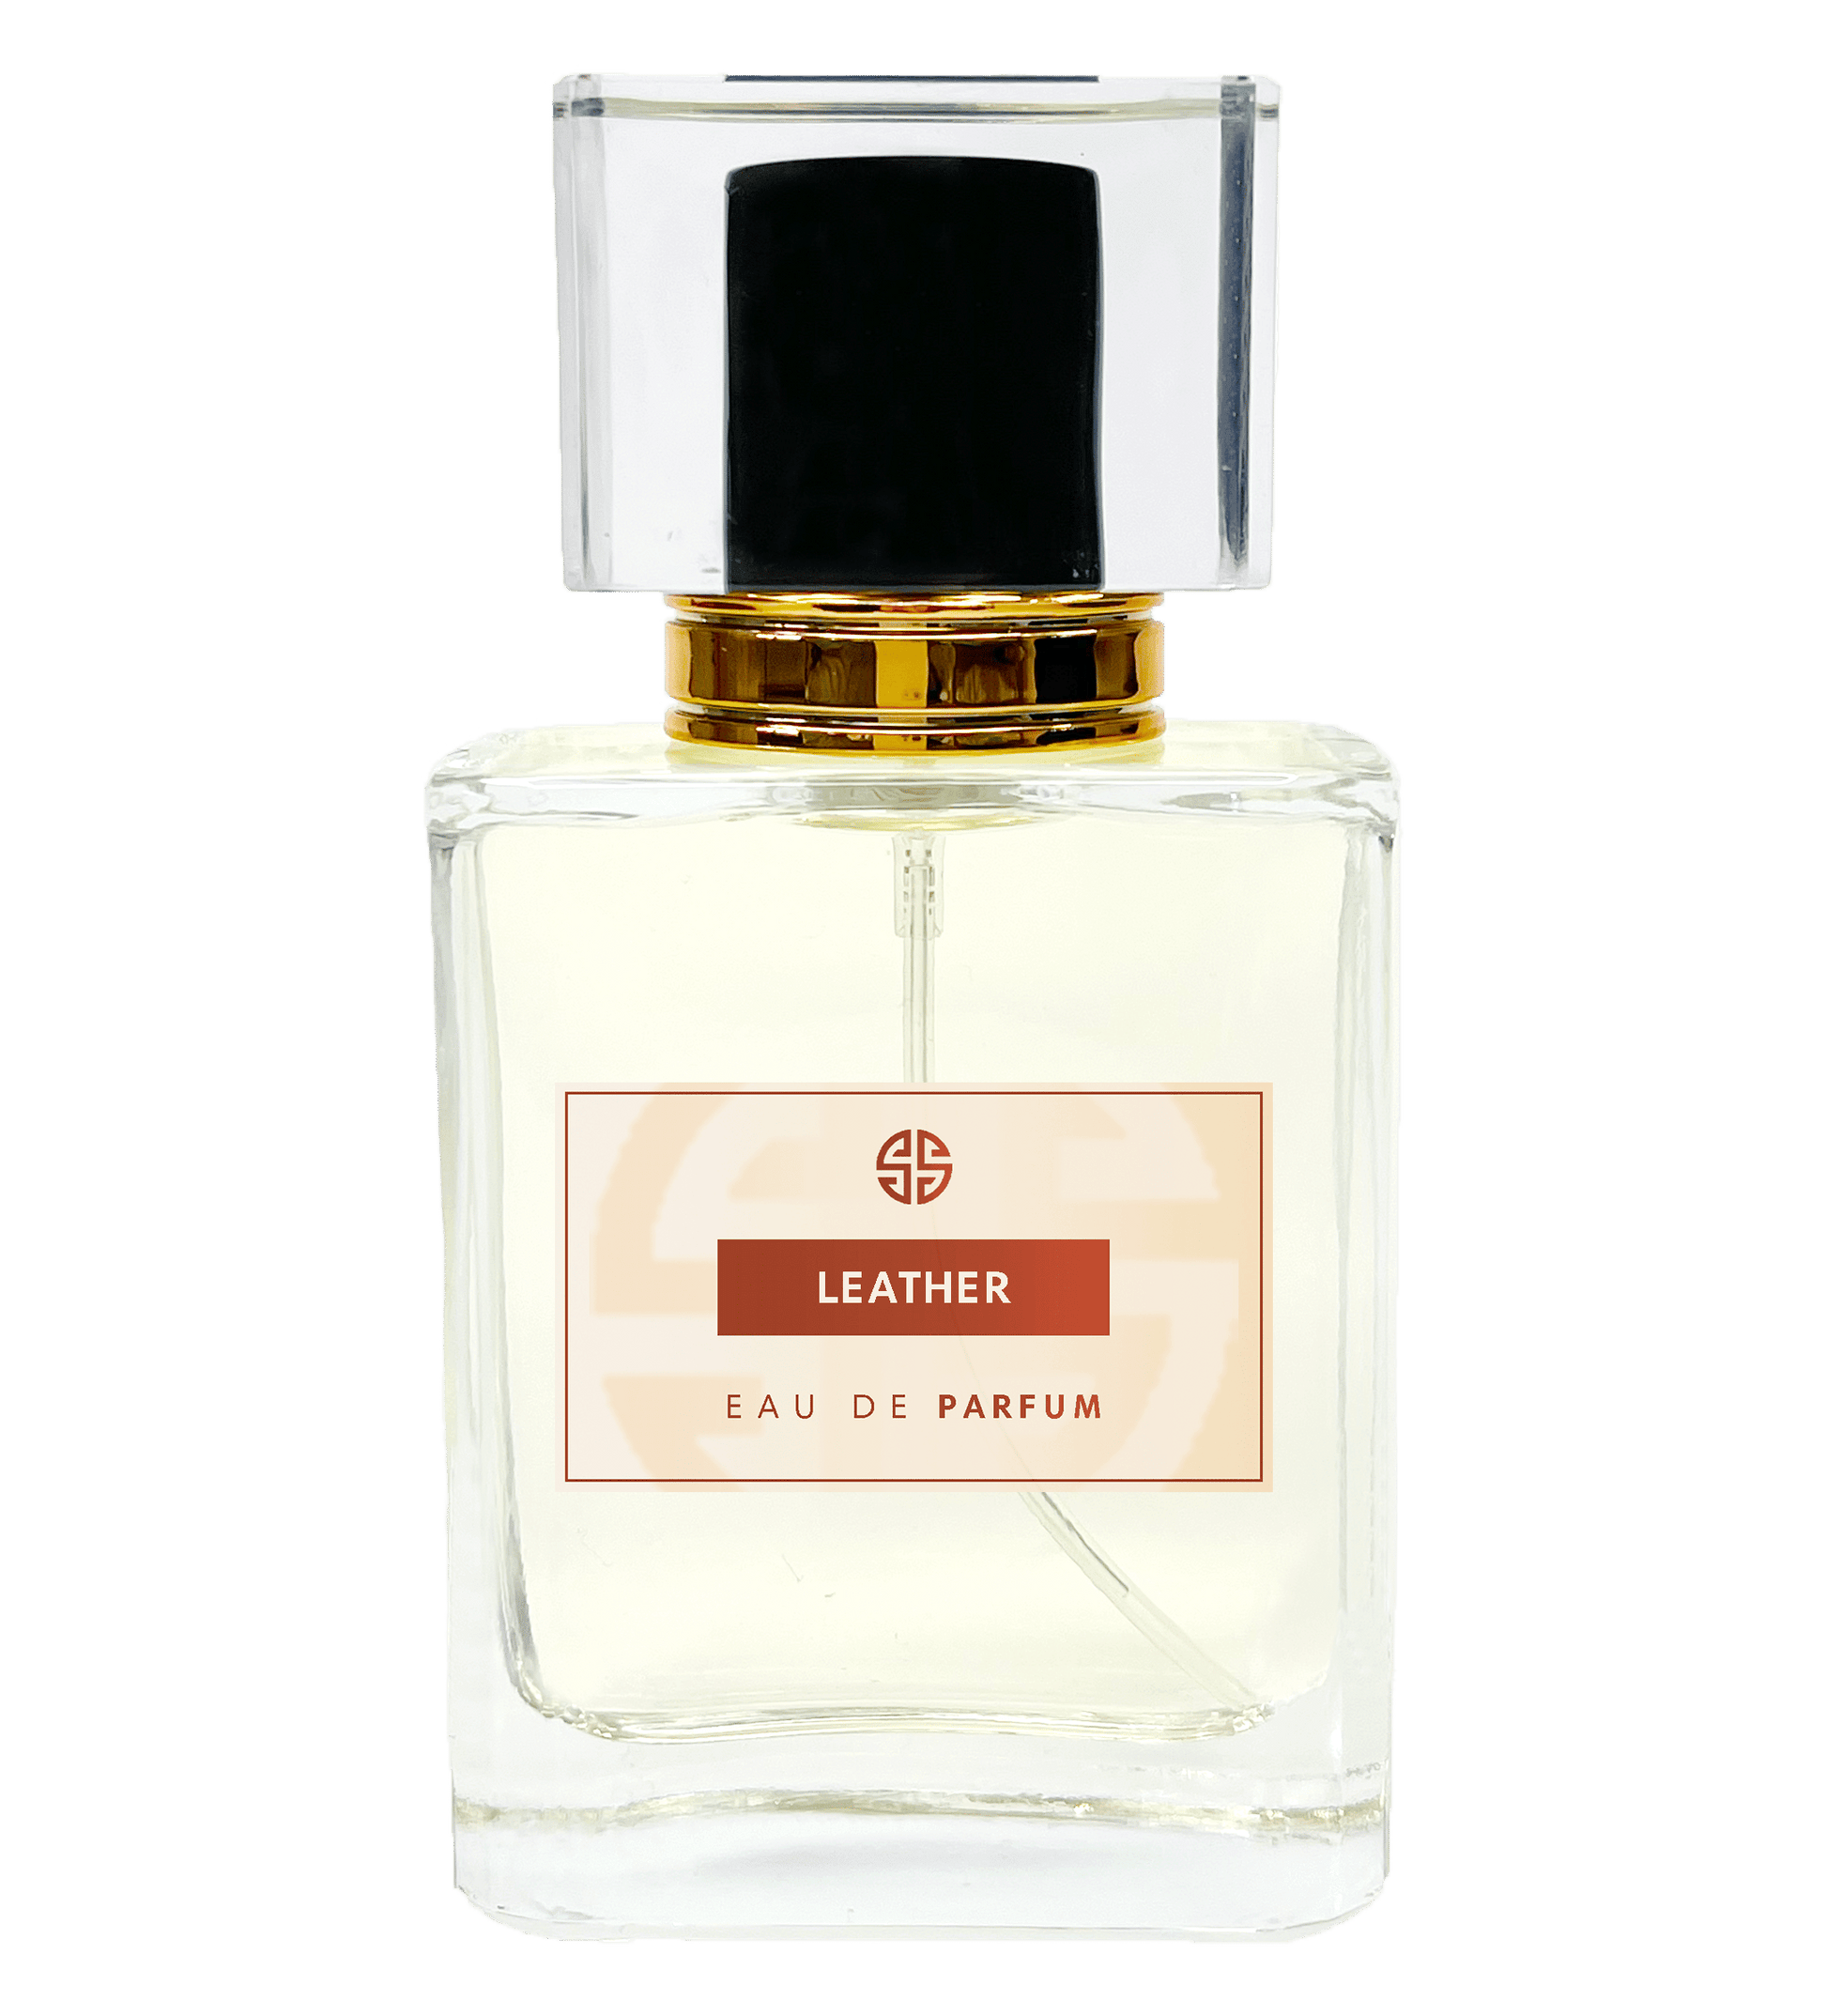 Ombre Leather parfum - Similar Scent LEATHER - undefined